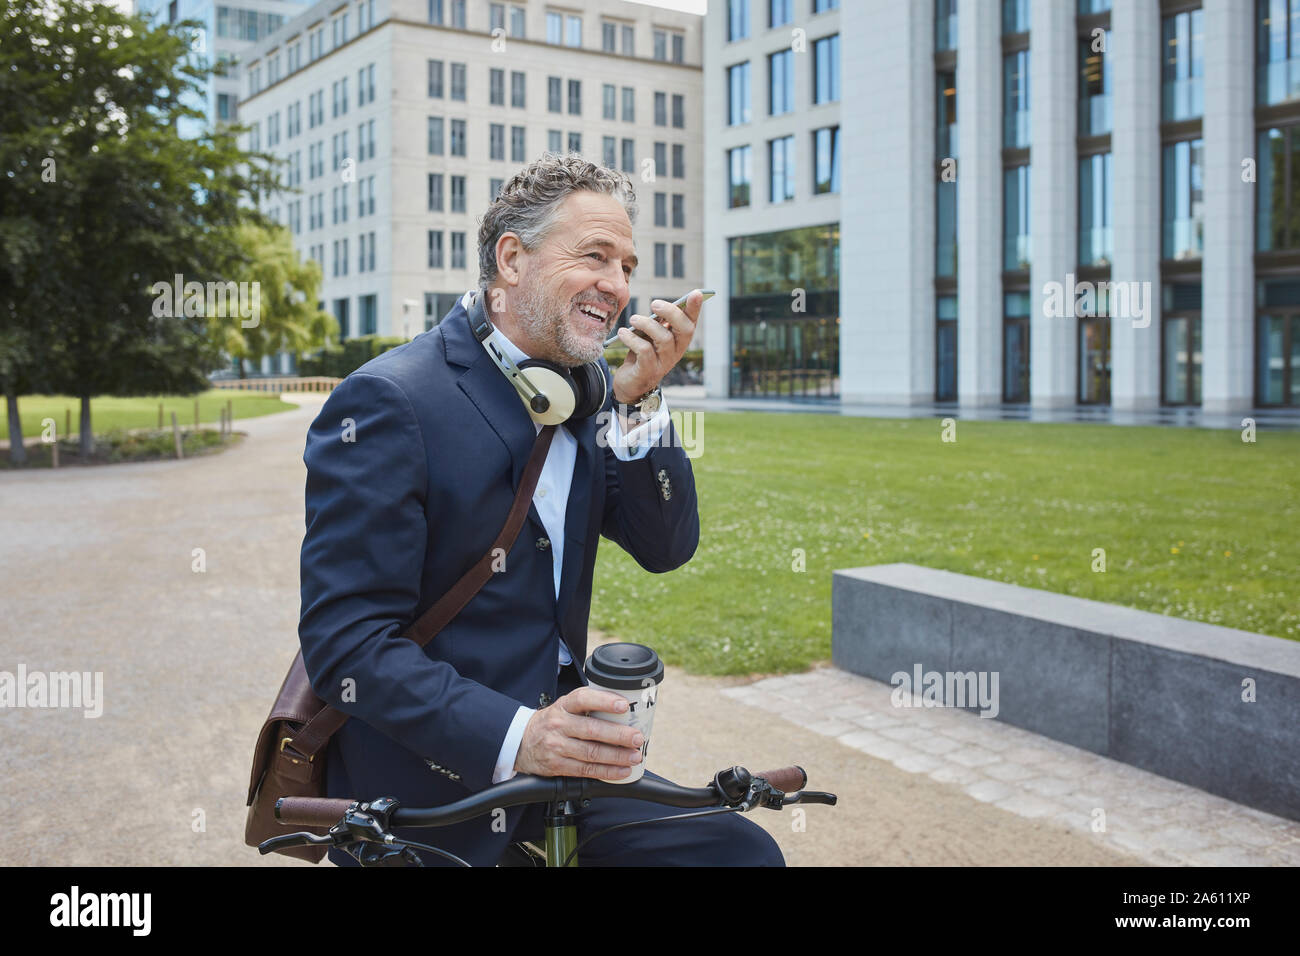 Mature businessman with bicycle using smartphone in the city Stock Photo